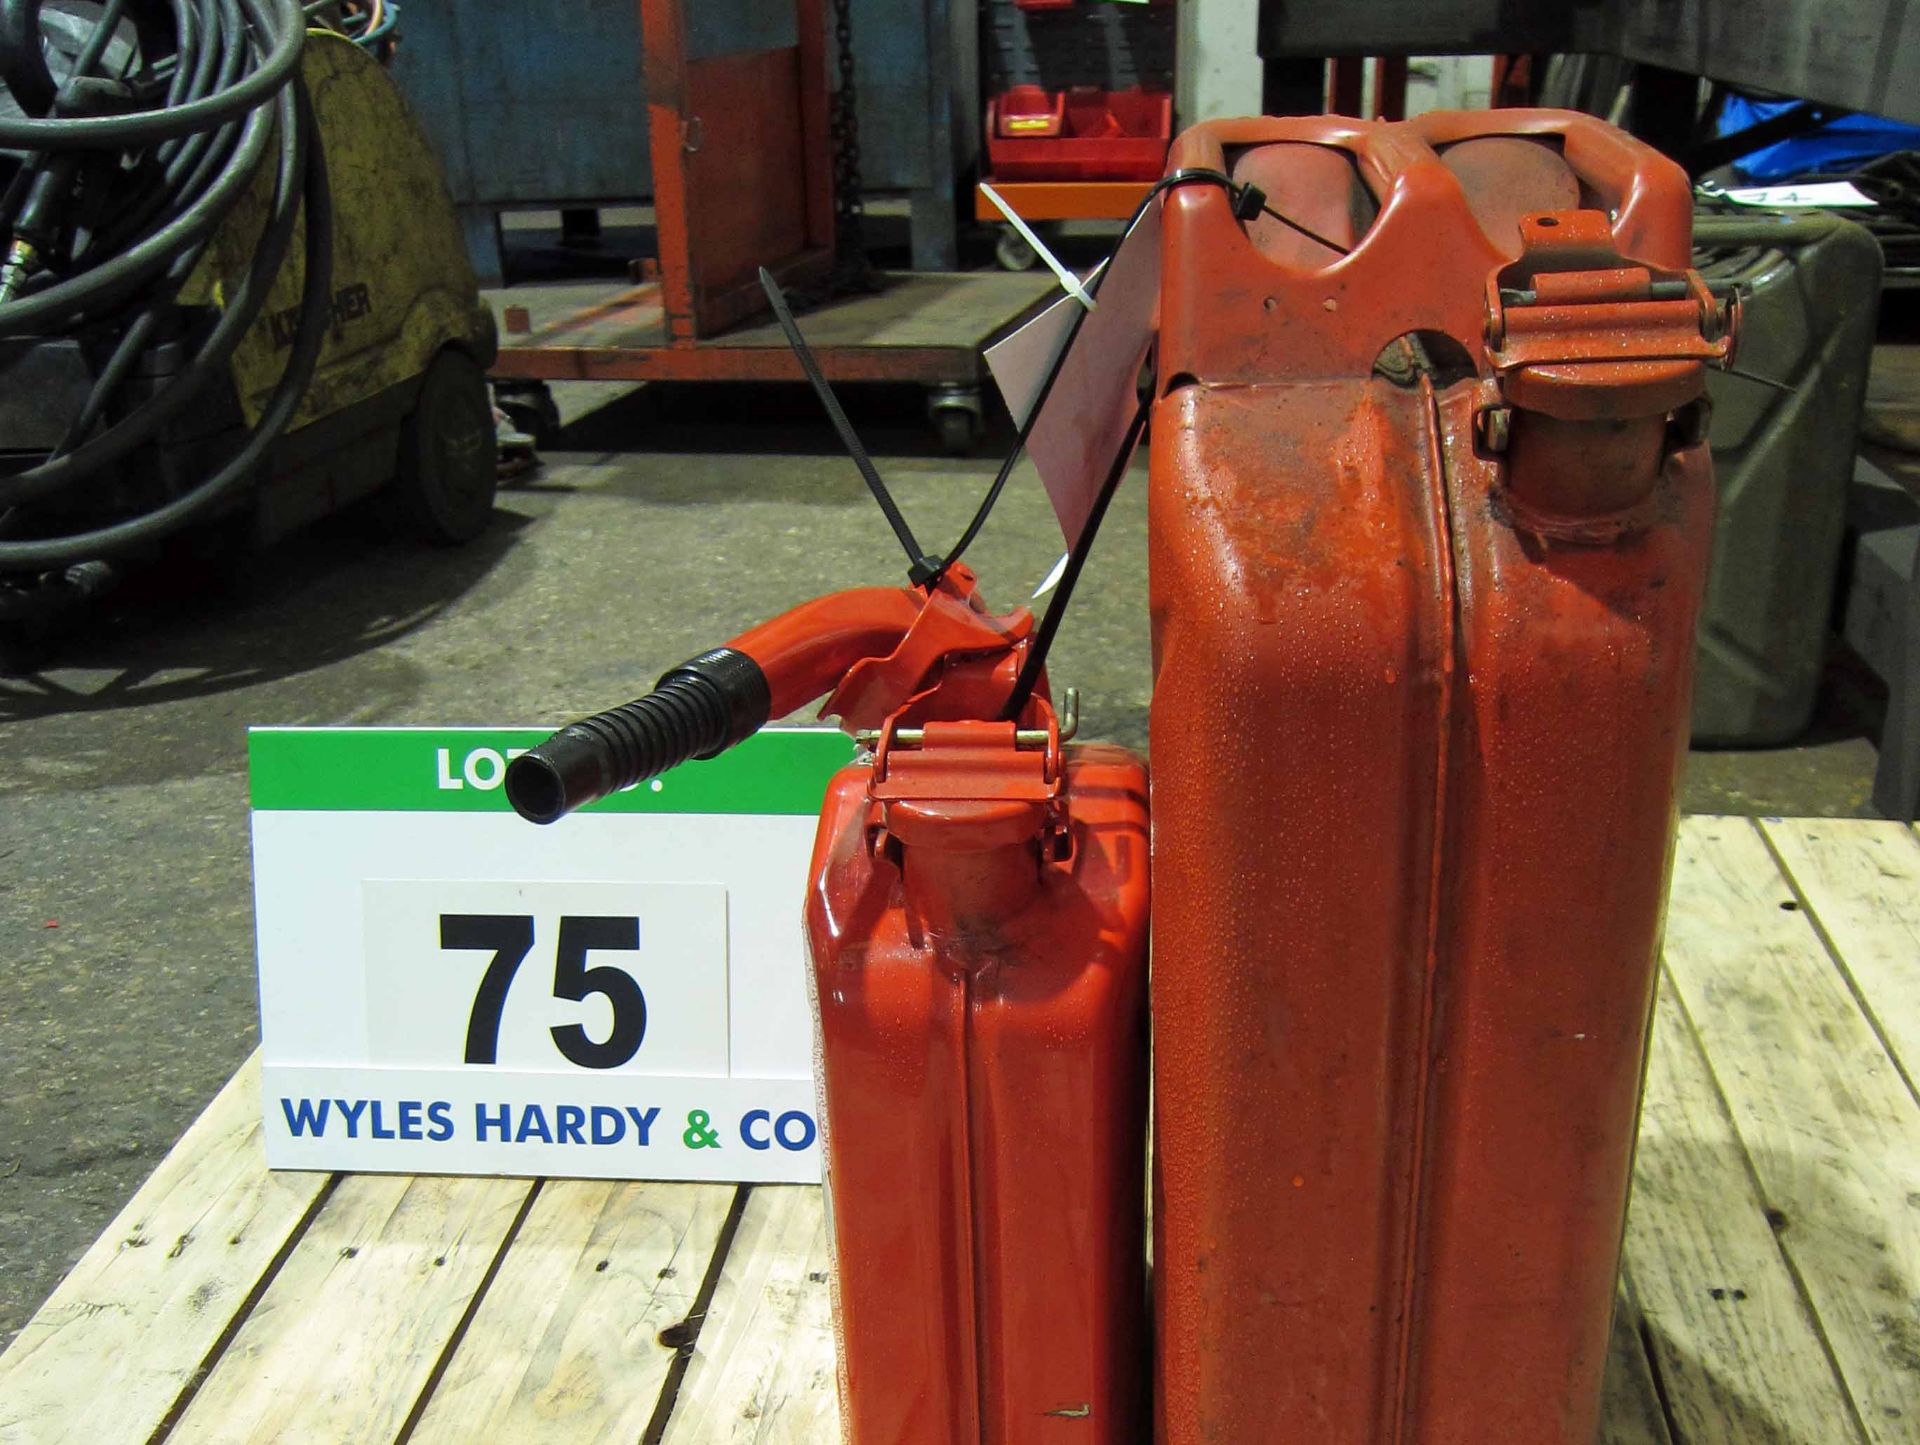 A 20-Litre Petrol Jerry Can and A 5-Litre Petrol Jerry Can and Filling Spout